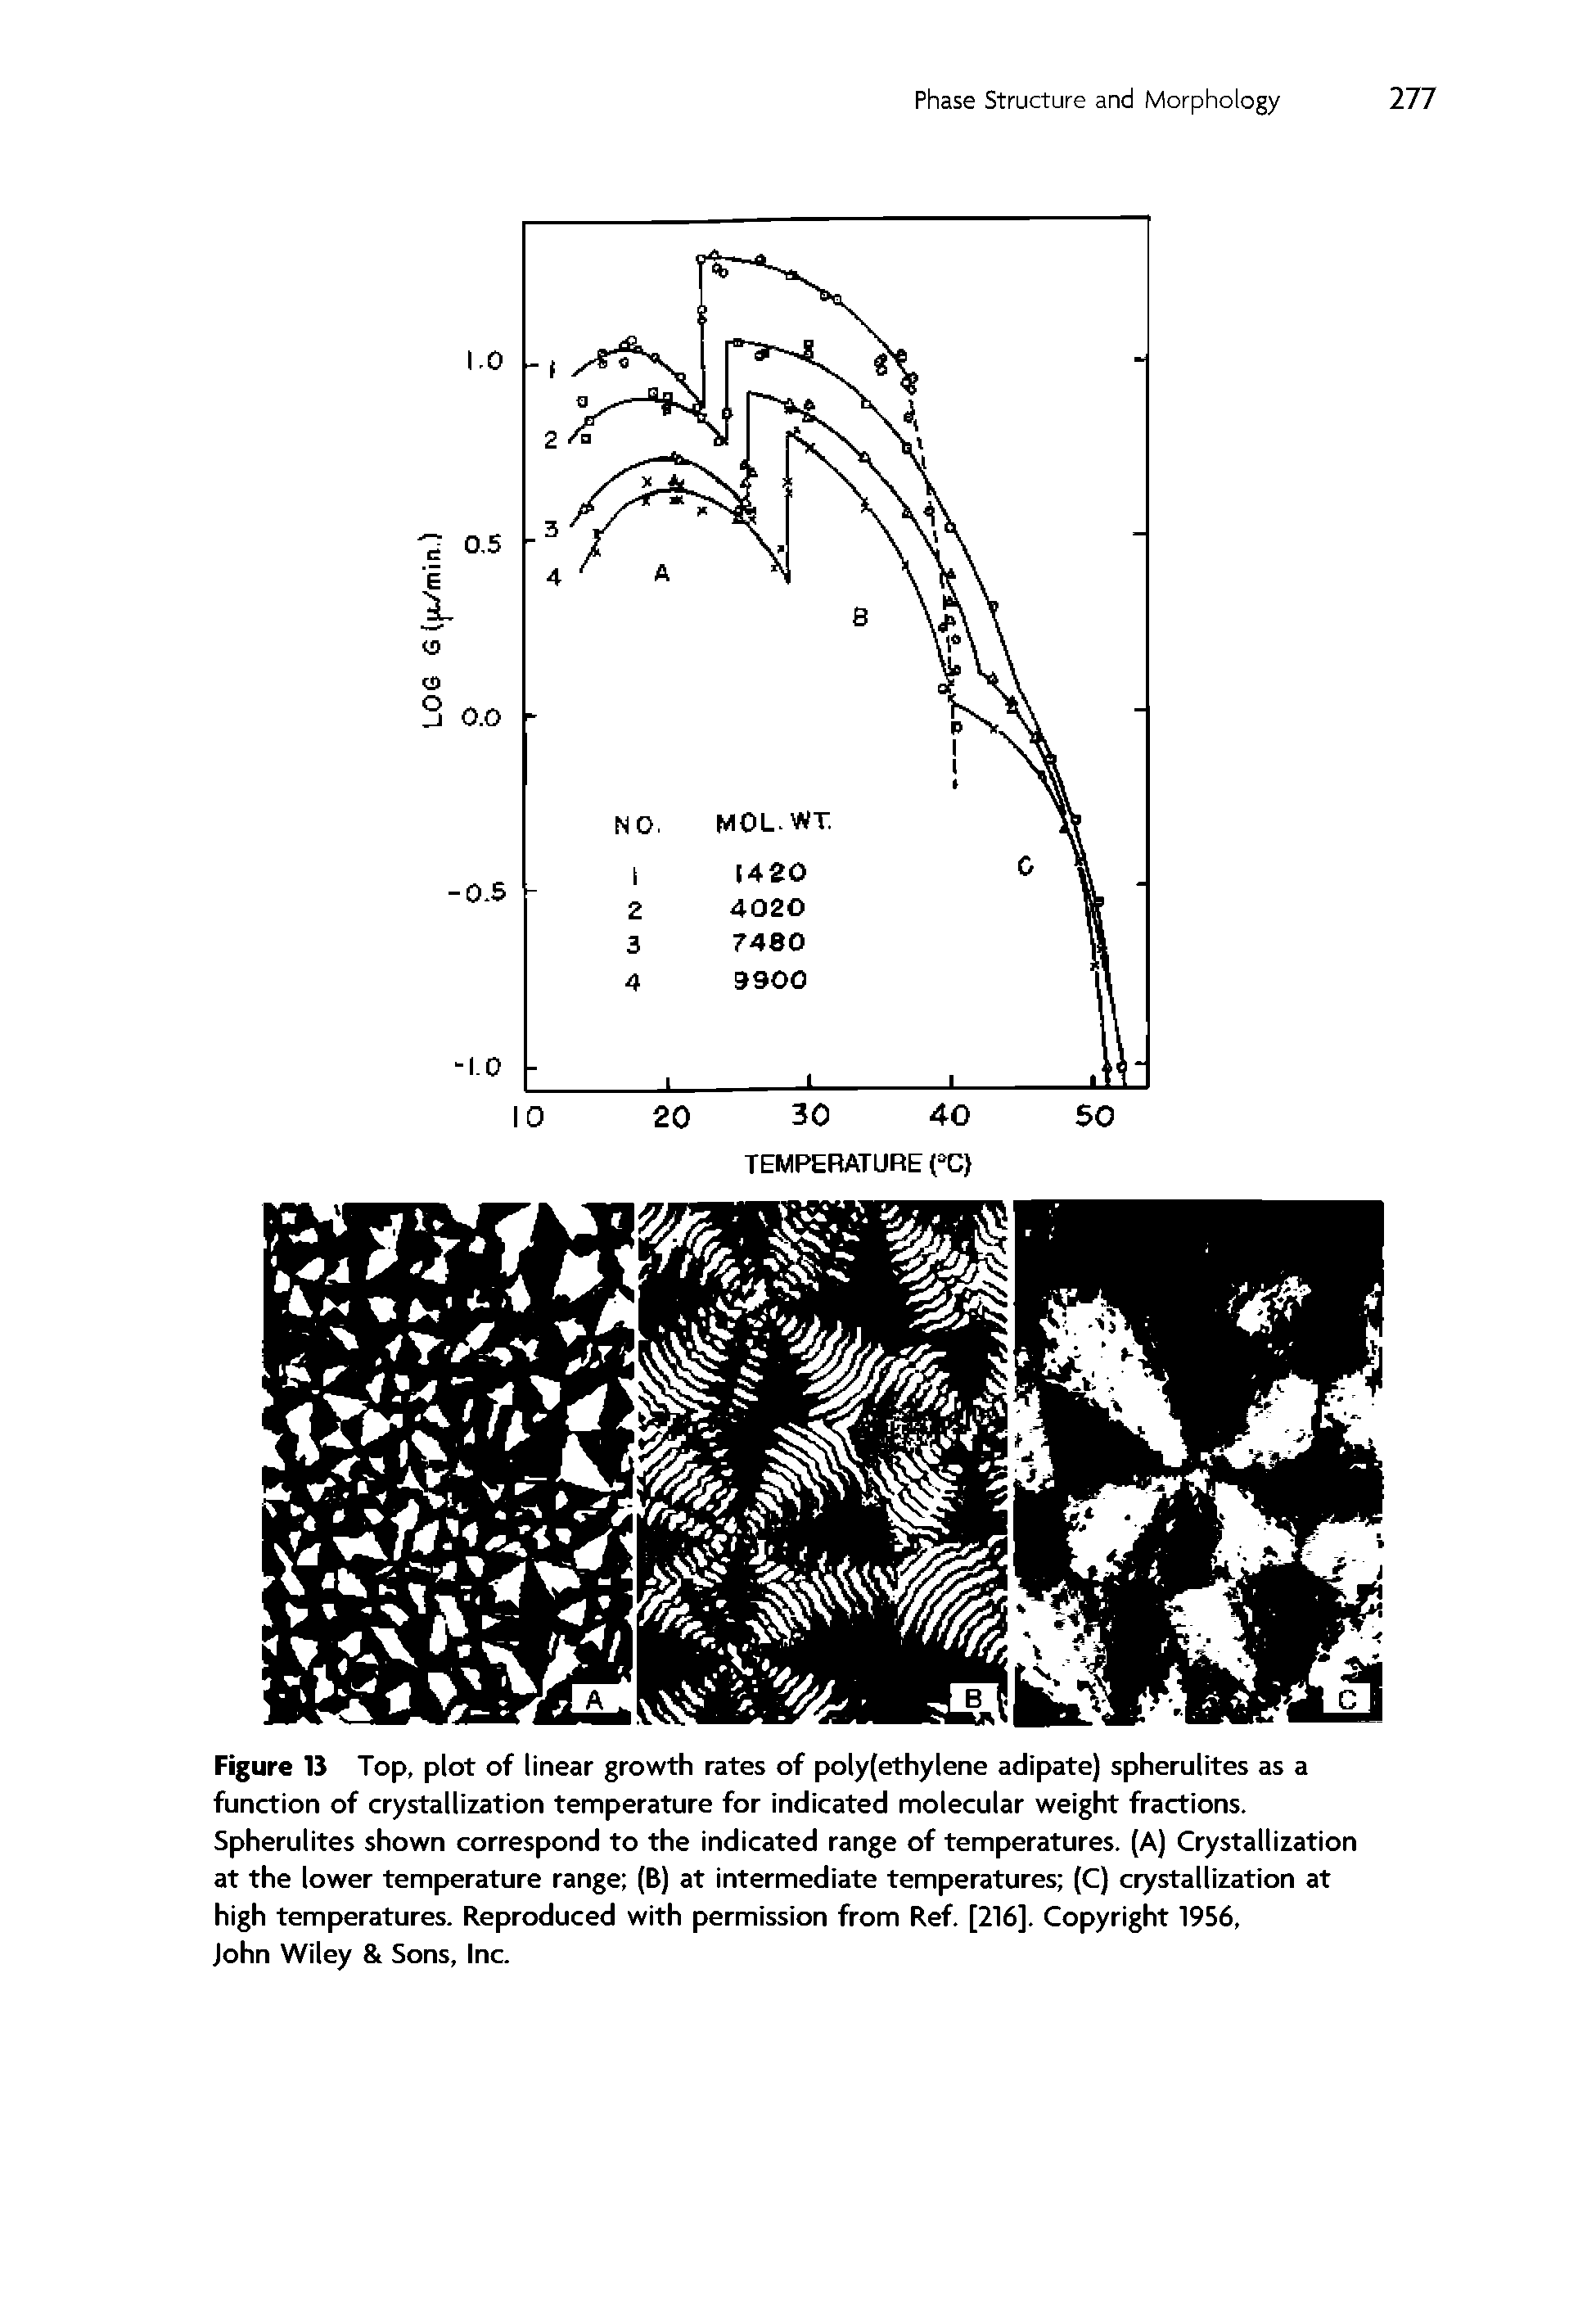 Figure 13 Top, plot of linear growth rates of polyfethylene adipate) spherulites as a function of crystallization temperature for indicated molecular weight fractions. Spherulites shown correspond to the indicated range of temperatures. (A) Crystallization at the lower temperature range (B) at intermediate temperatures (C) crystallization at high temperatures. Reproduced with permission from Ref. [216]. Copyright 1956,...